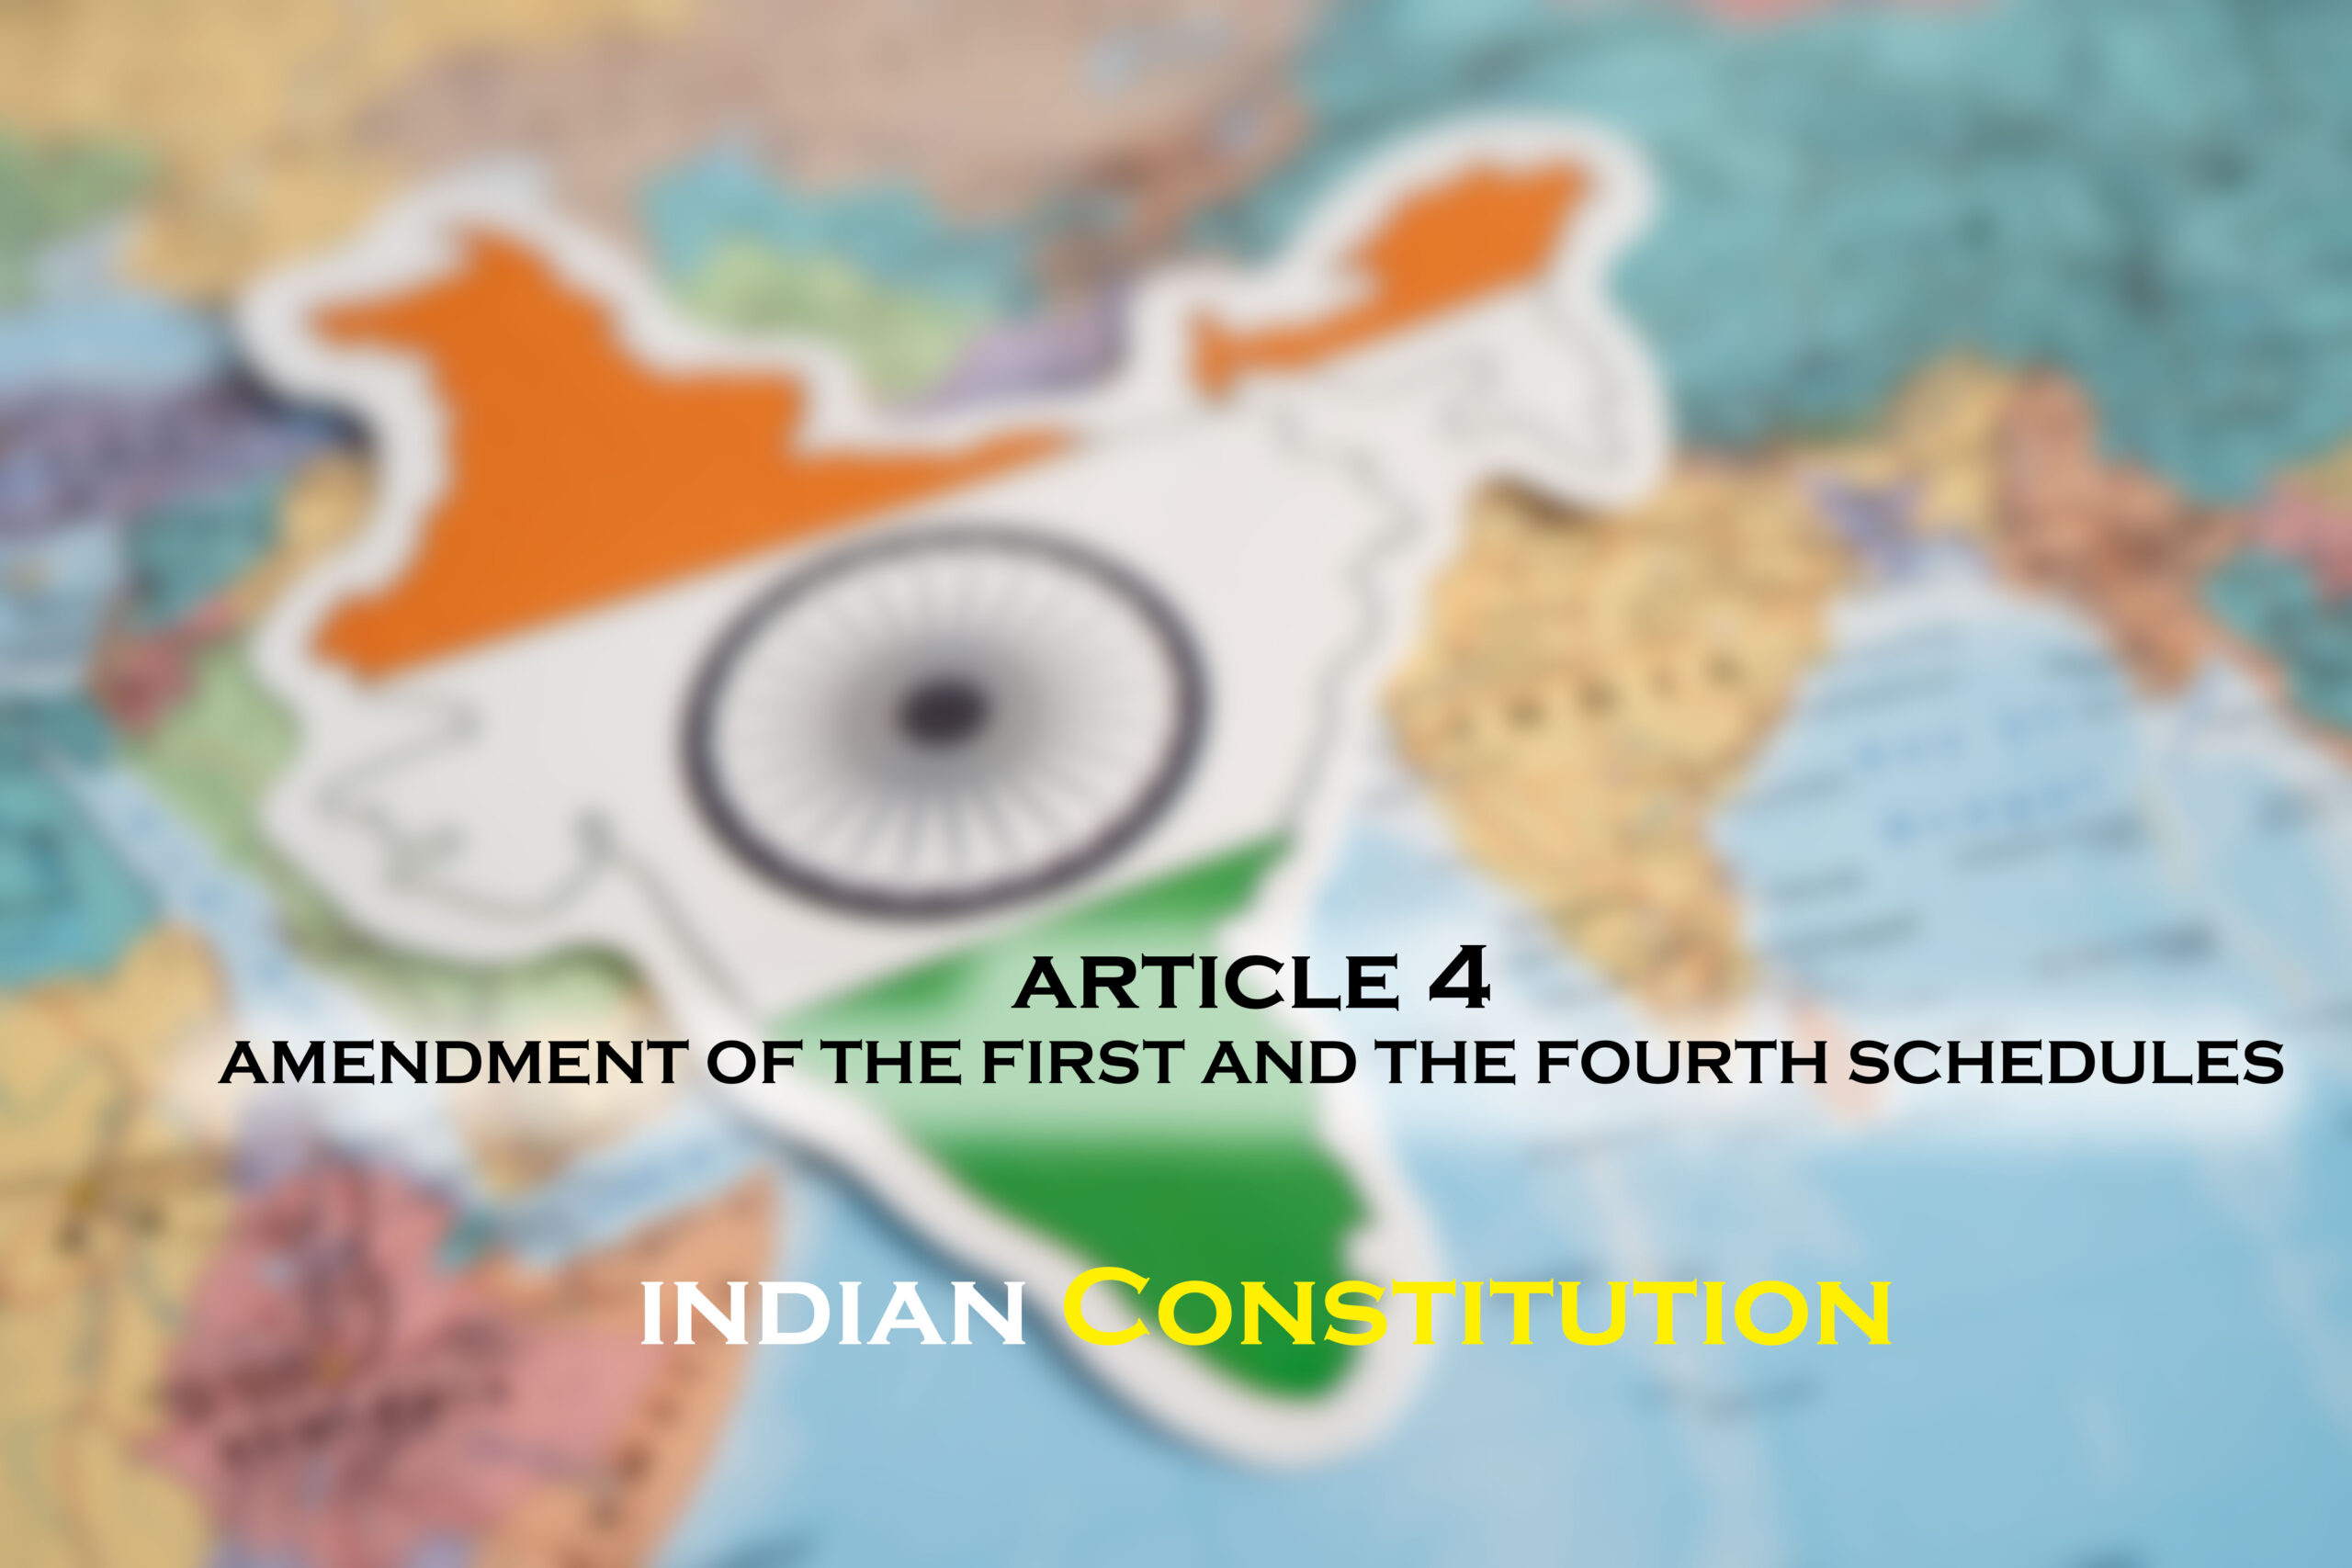 Article 4